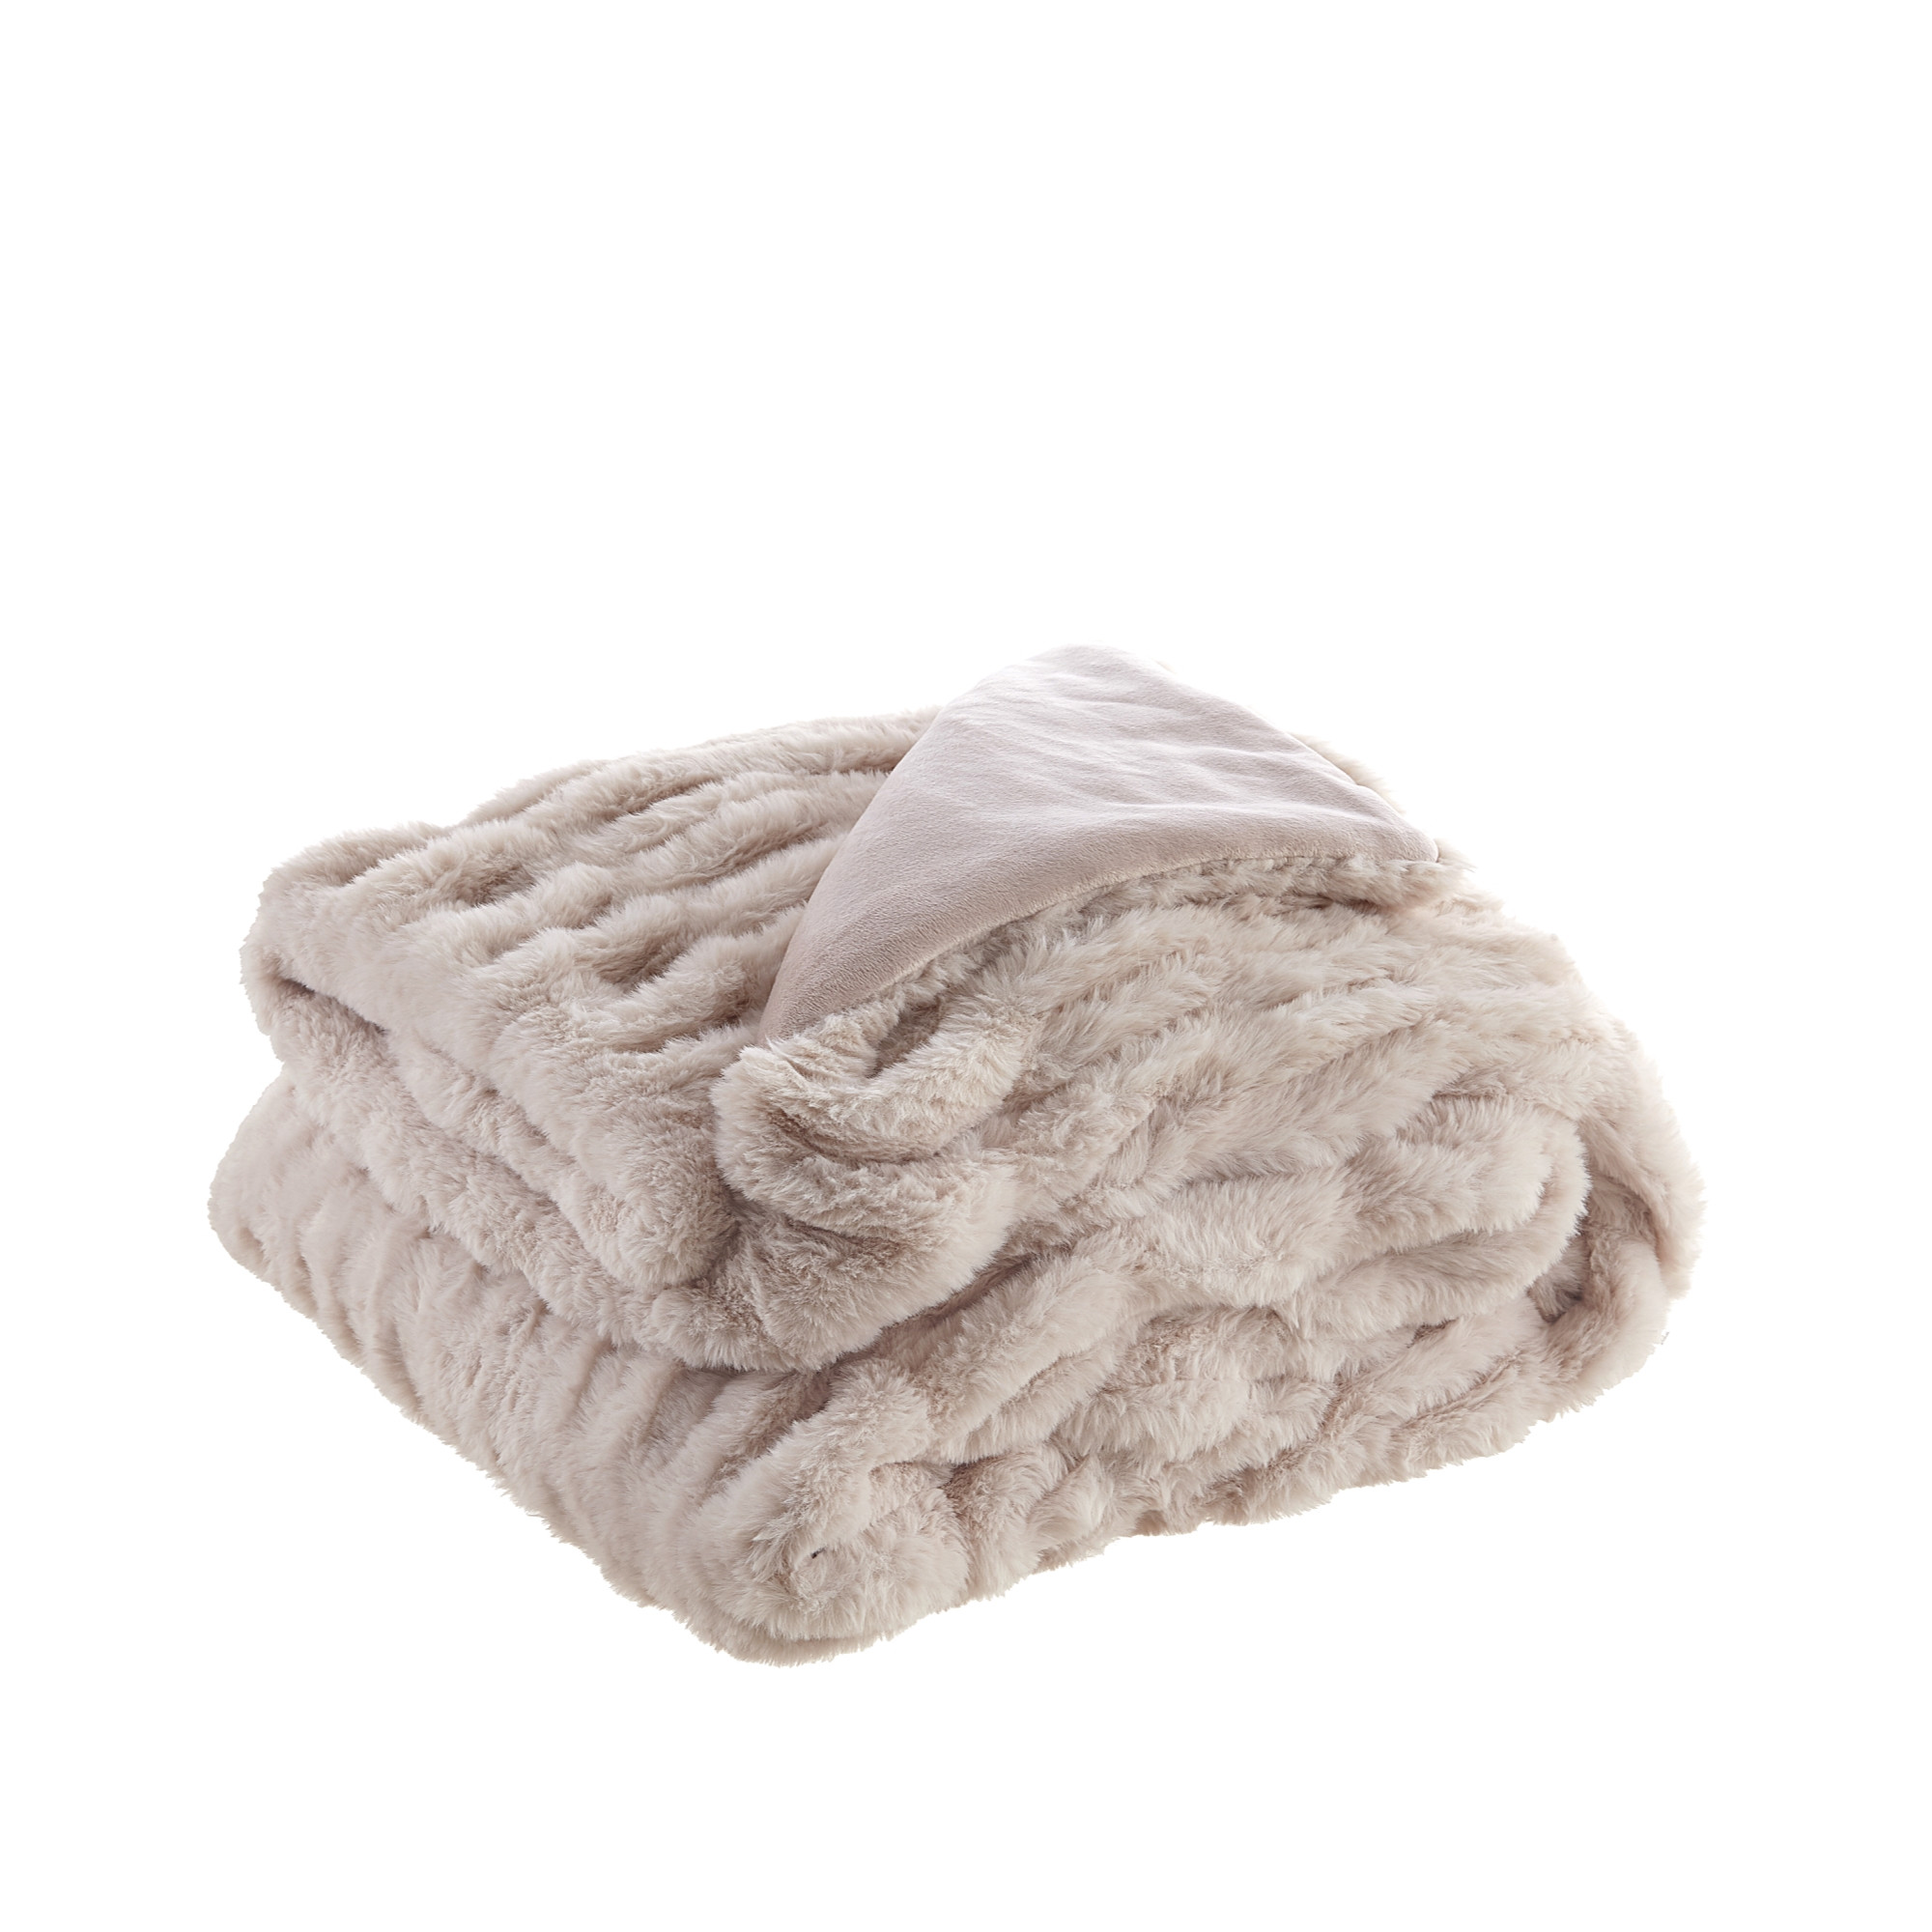 Blush Knitted Polyester Solid Color Throw Blanket-531395-1